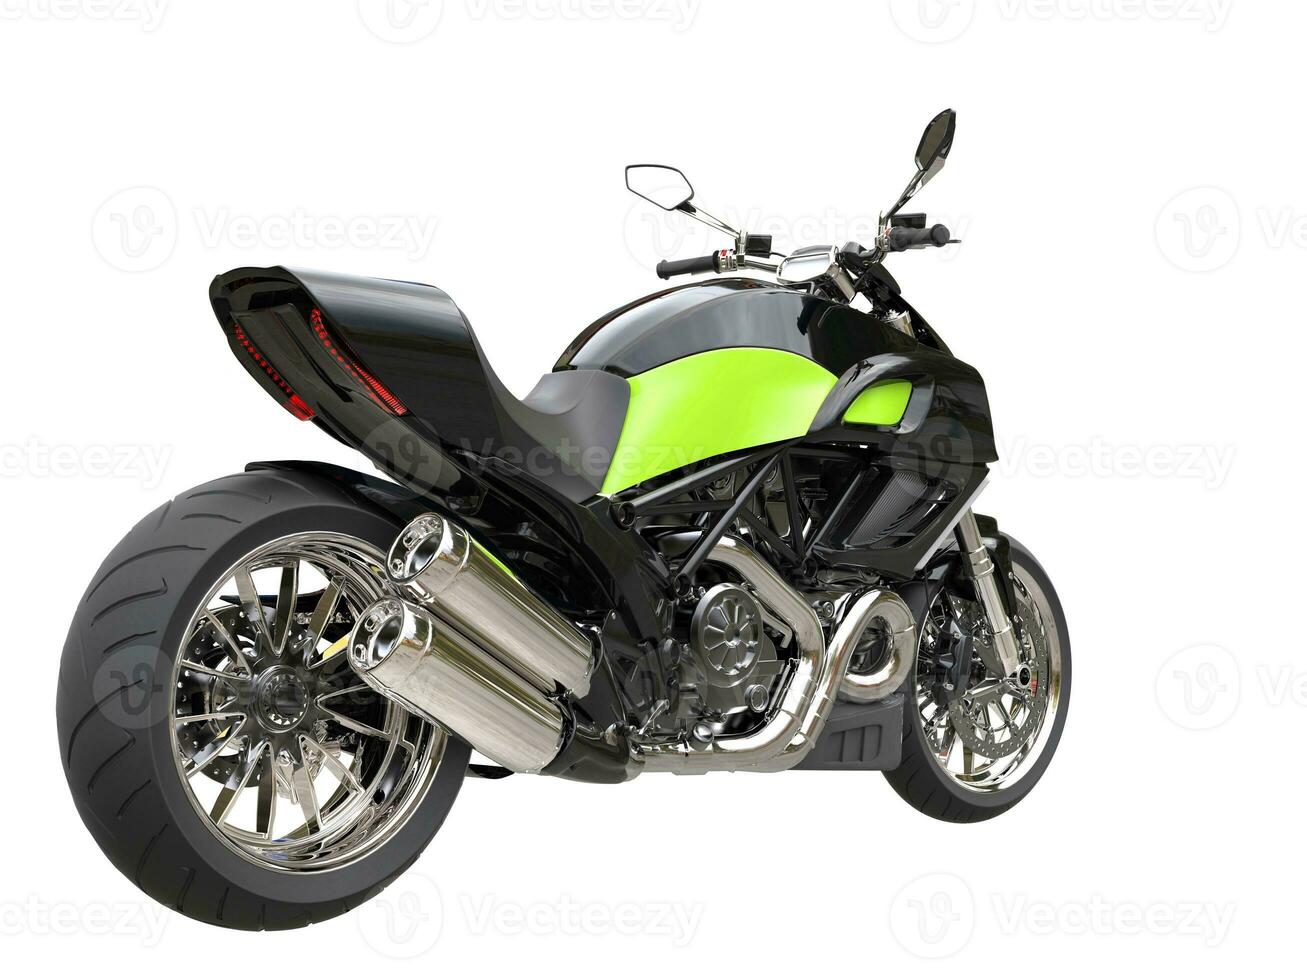 Black sports motorcycle with green details - back view photo